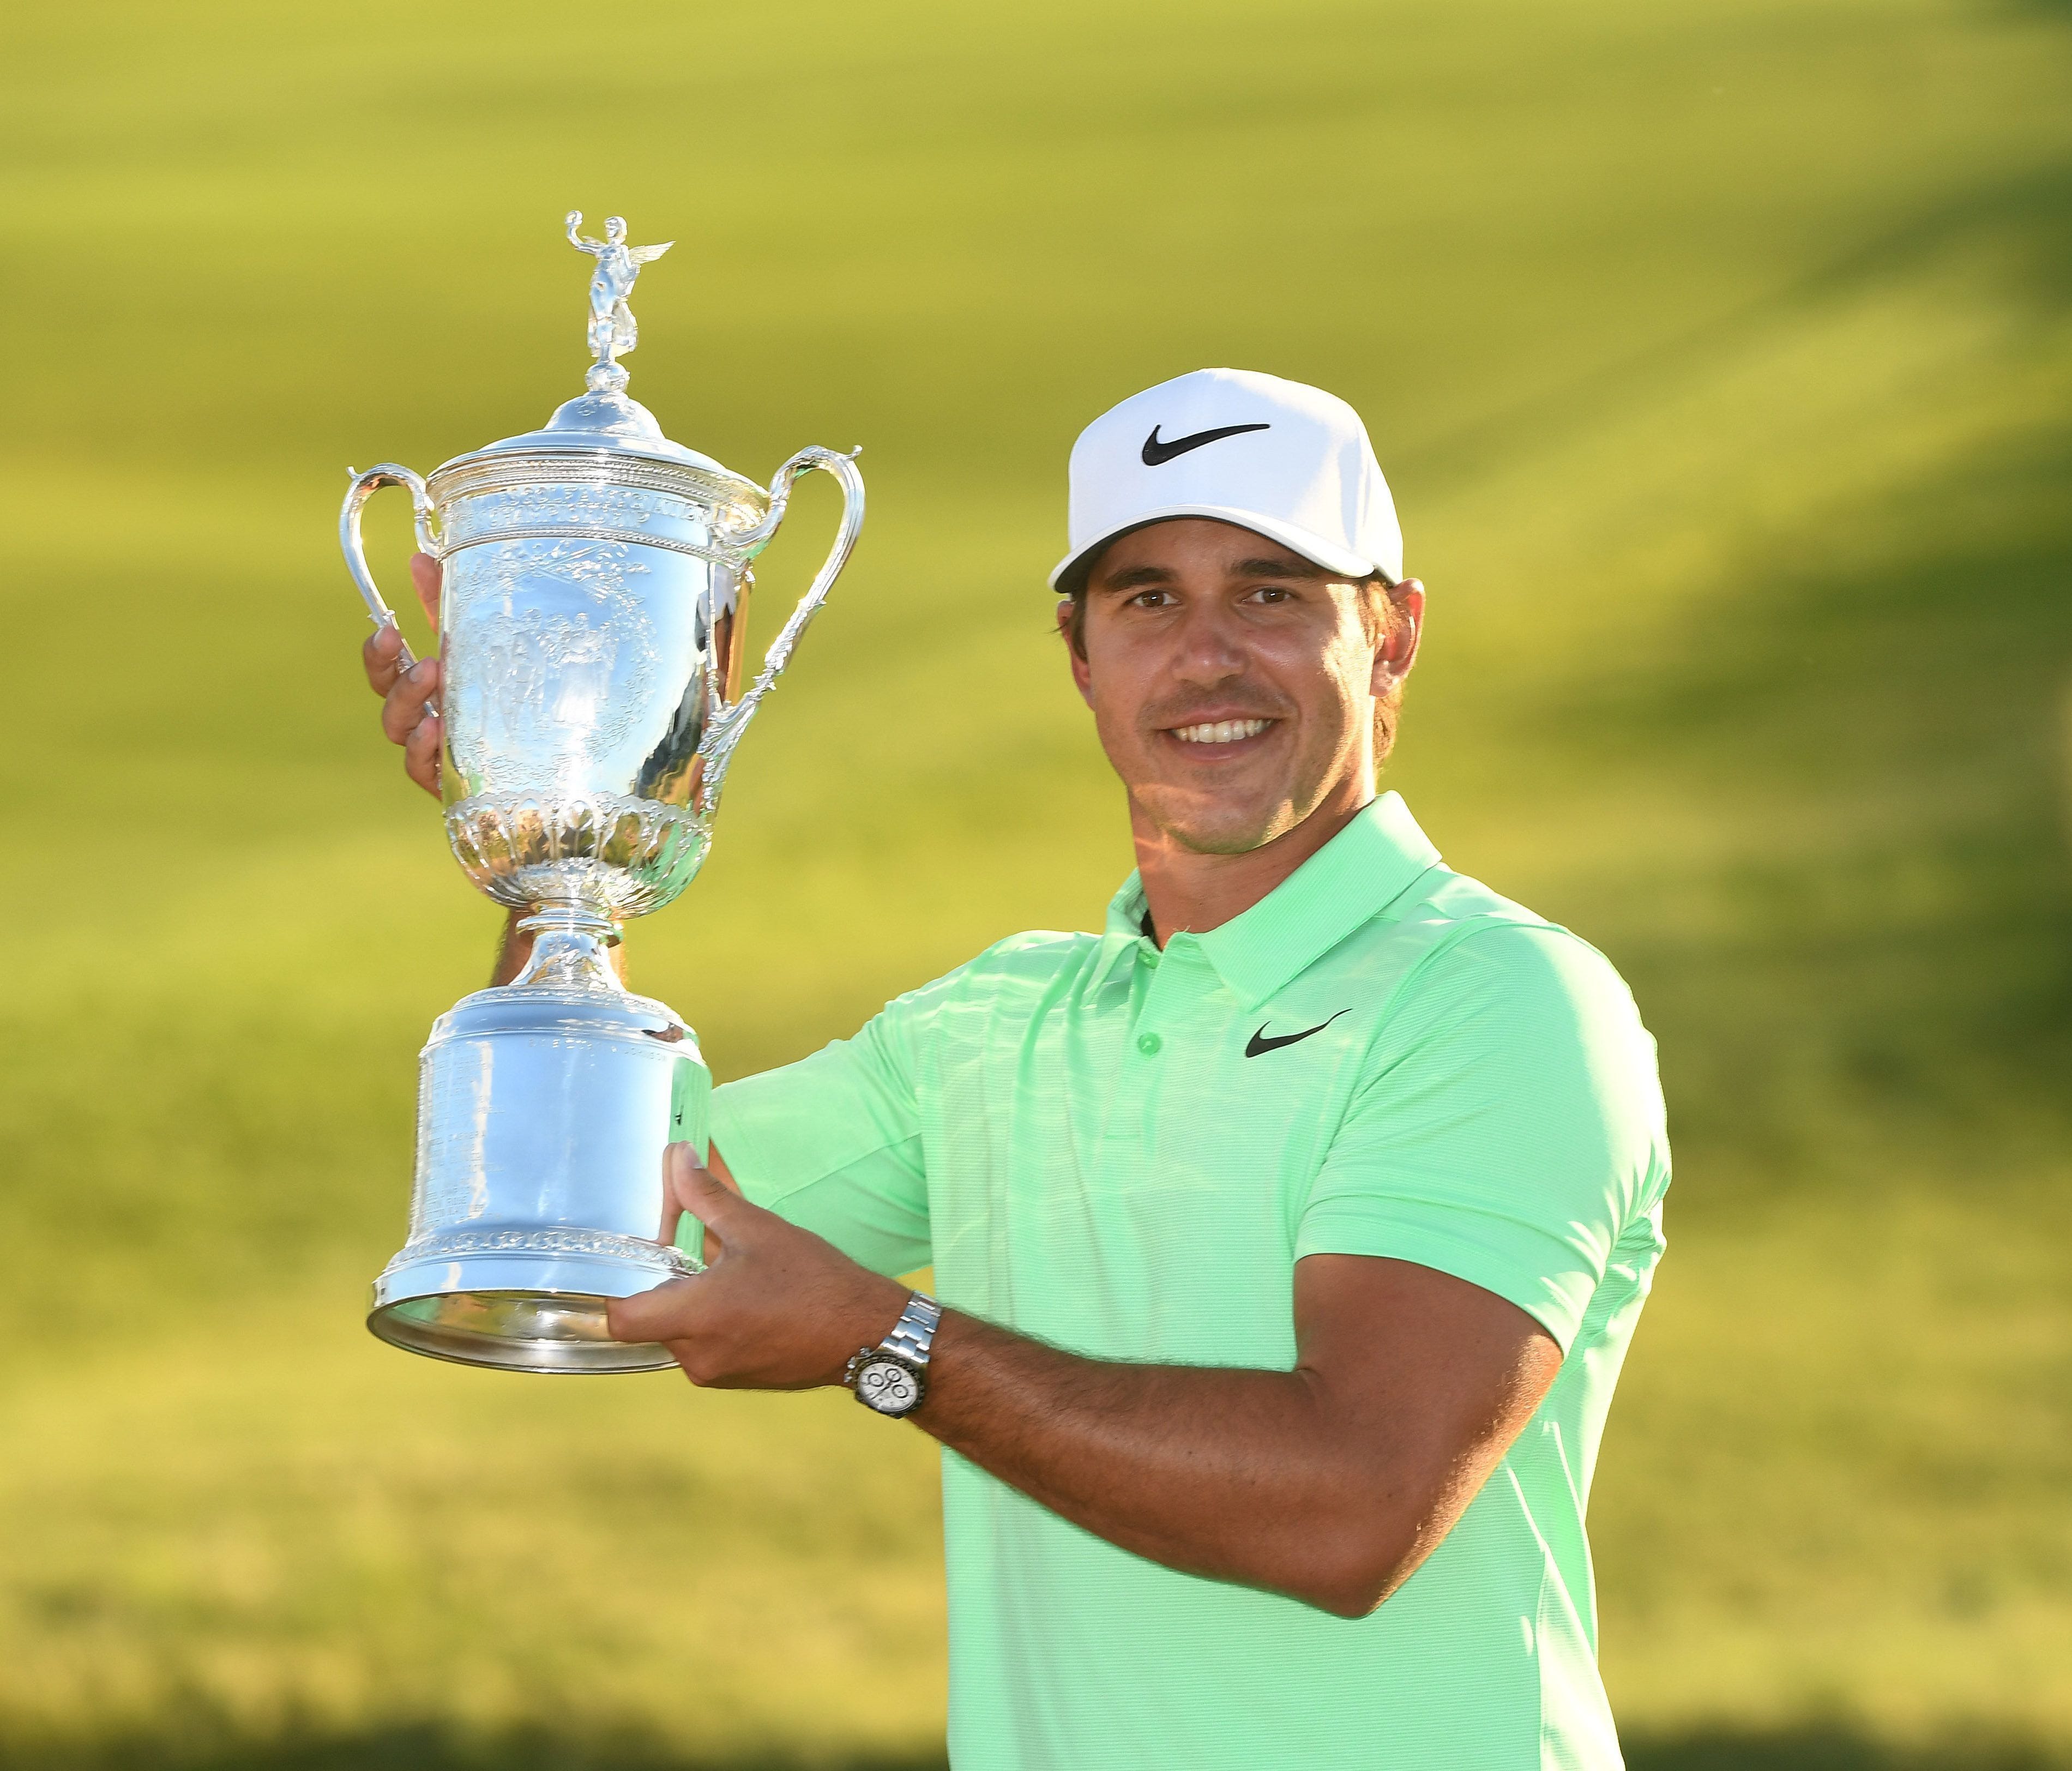 Brooks Koepka poses with the trophy after winning the U.S. Open golf tournament at Erin Hills on June 18.